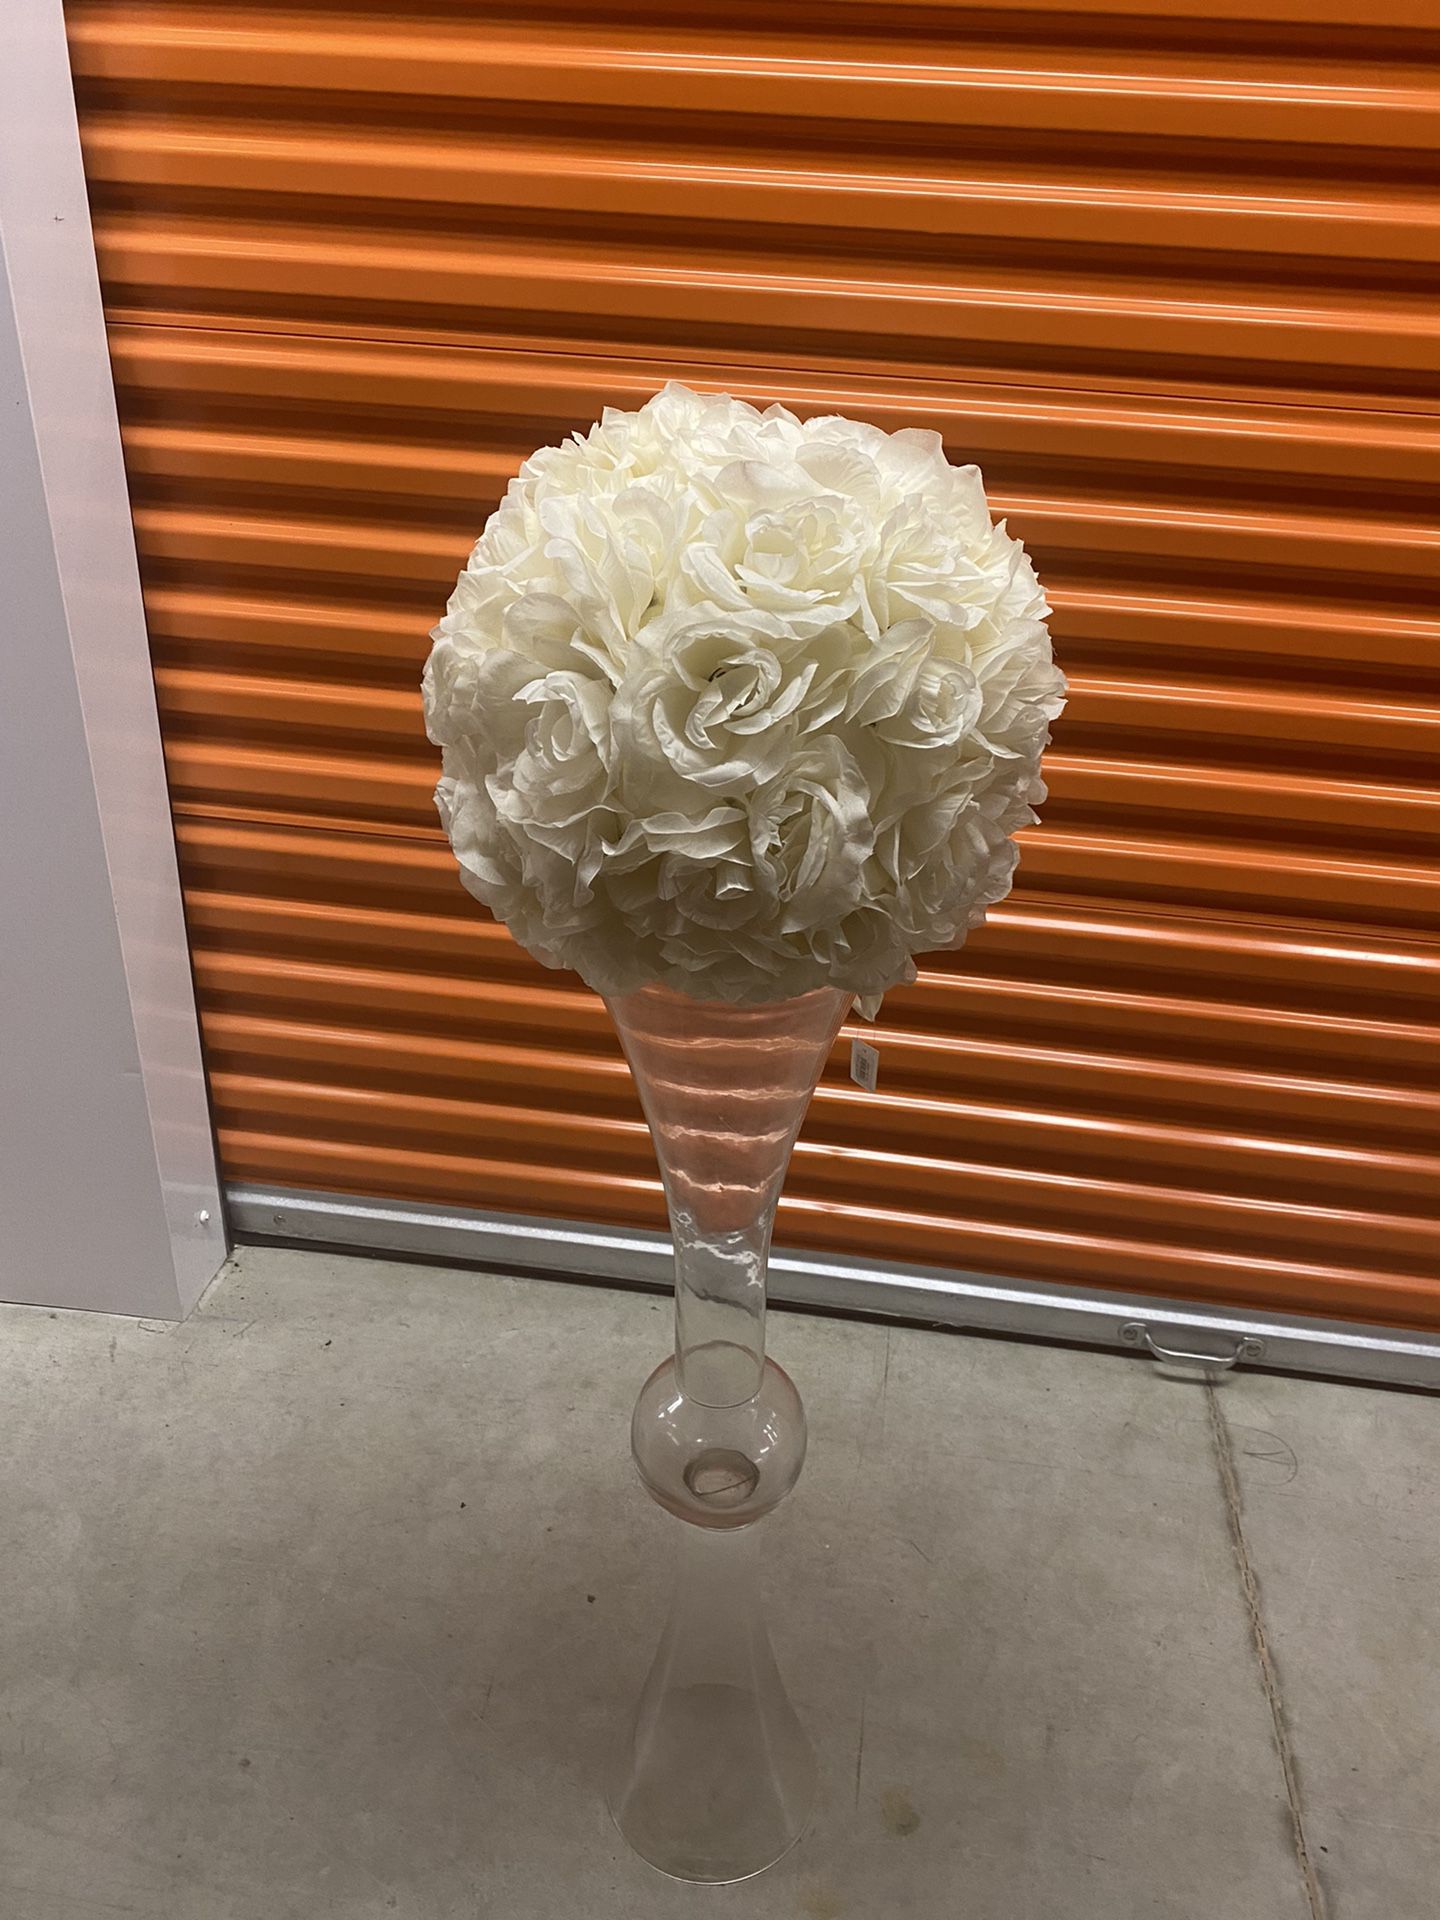 2 Flower Balls For  Sale For Any Event $15 Each 